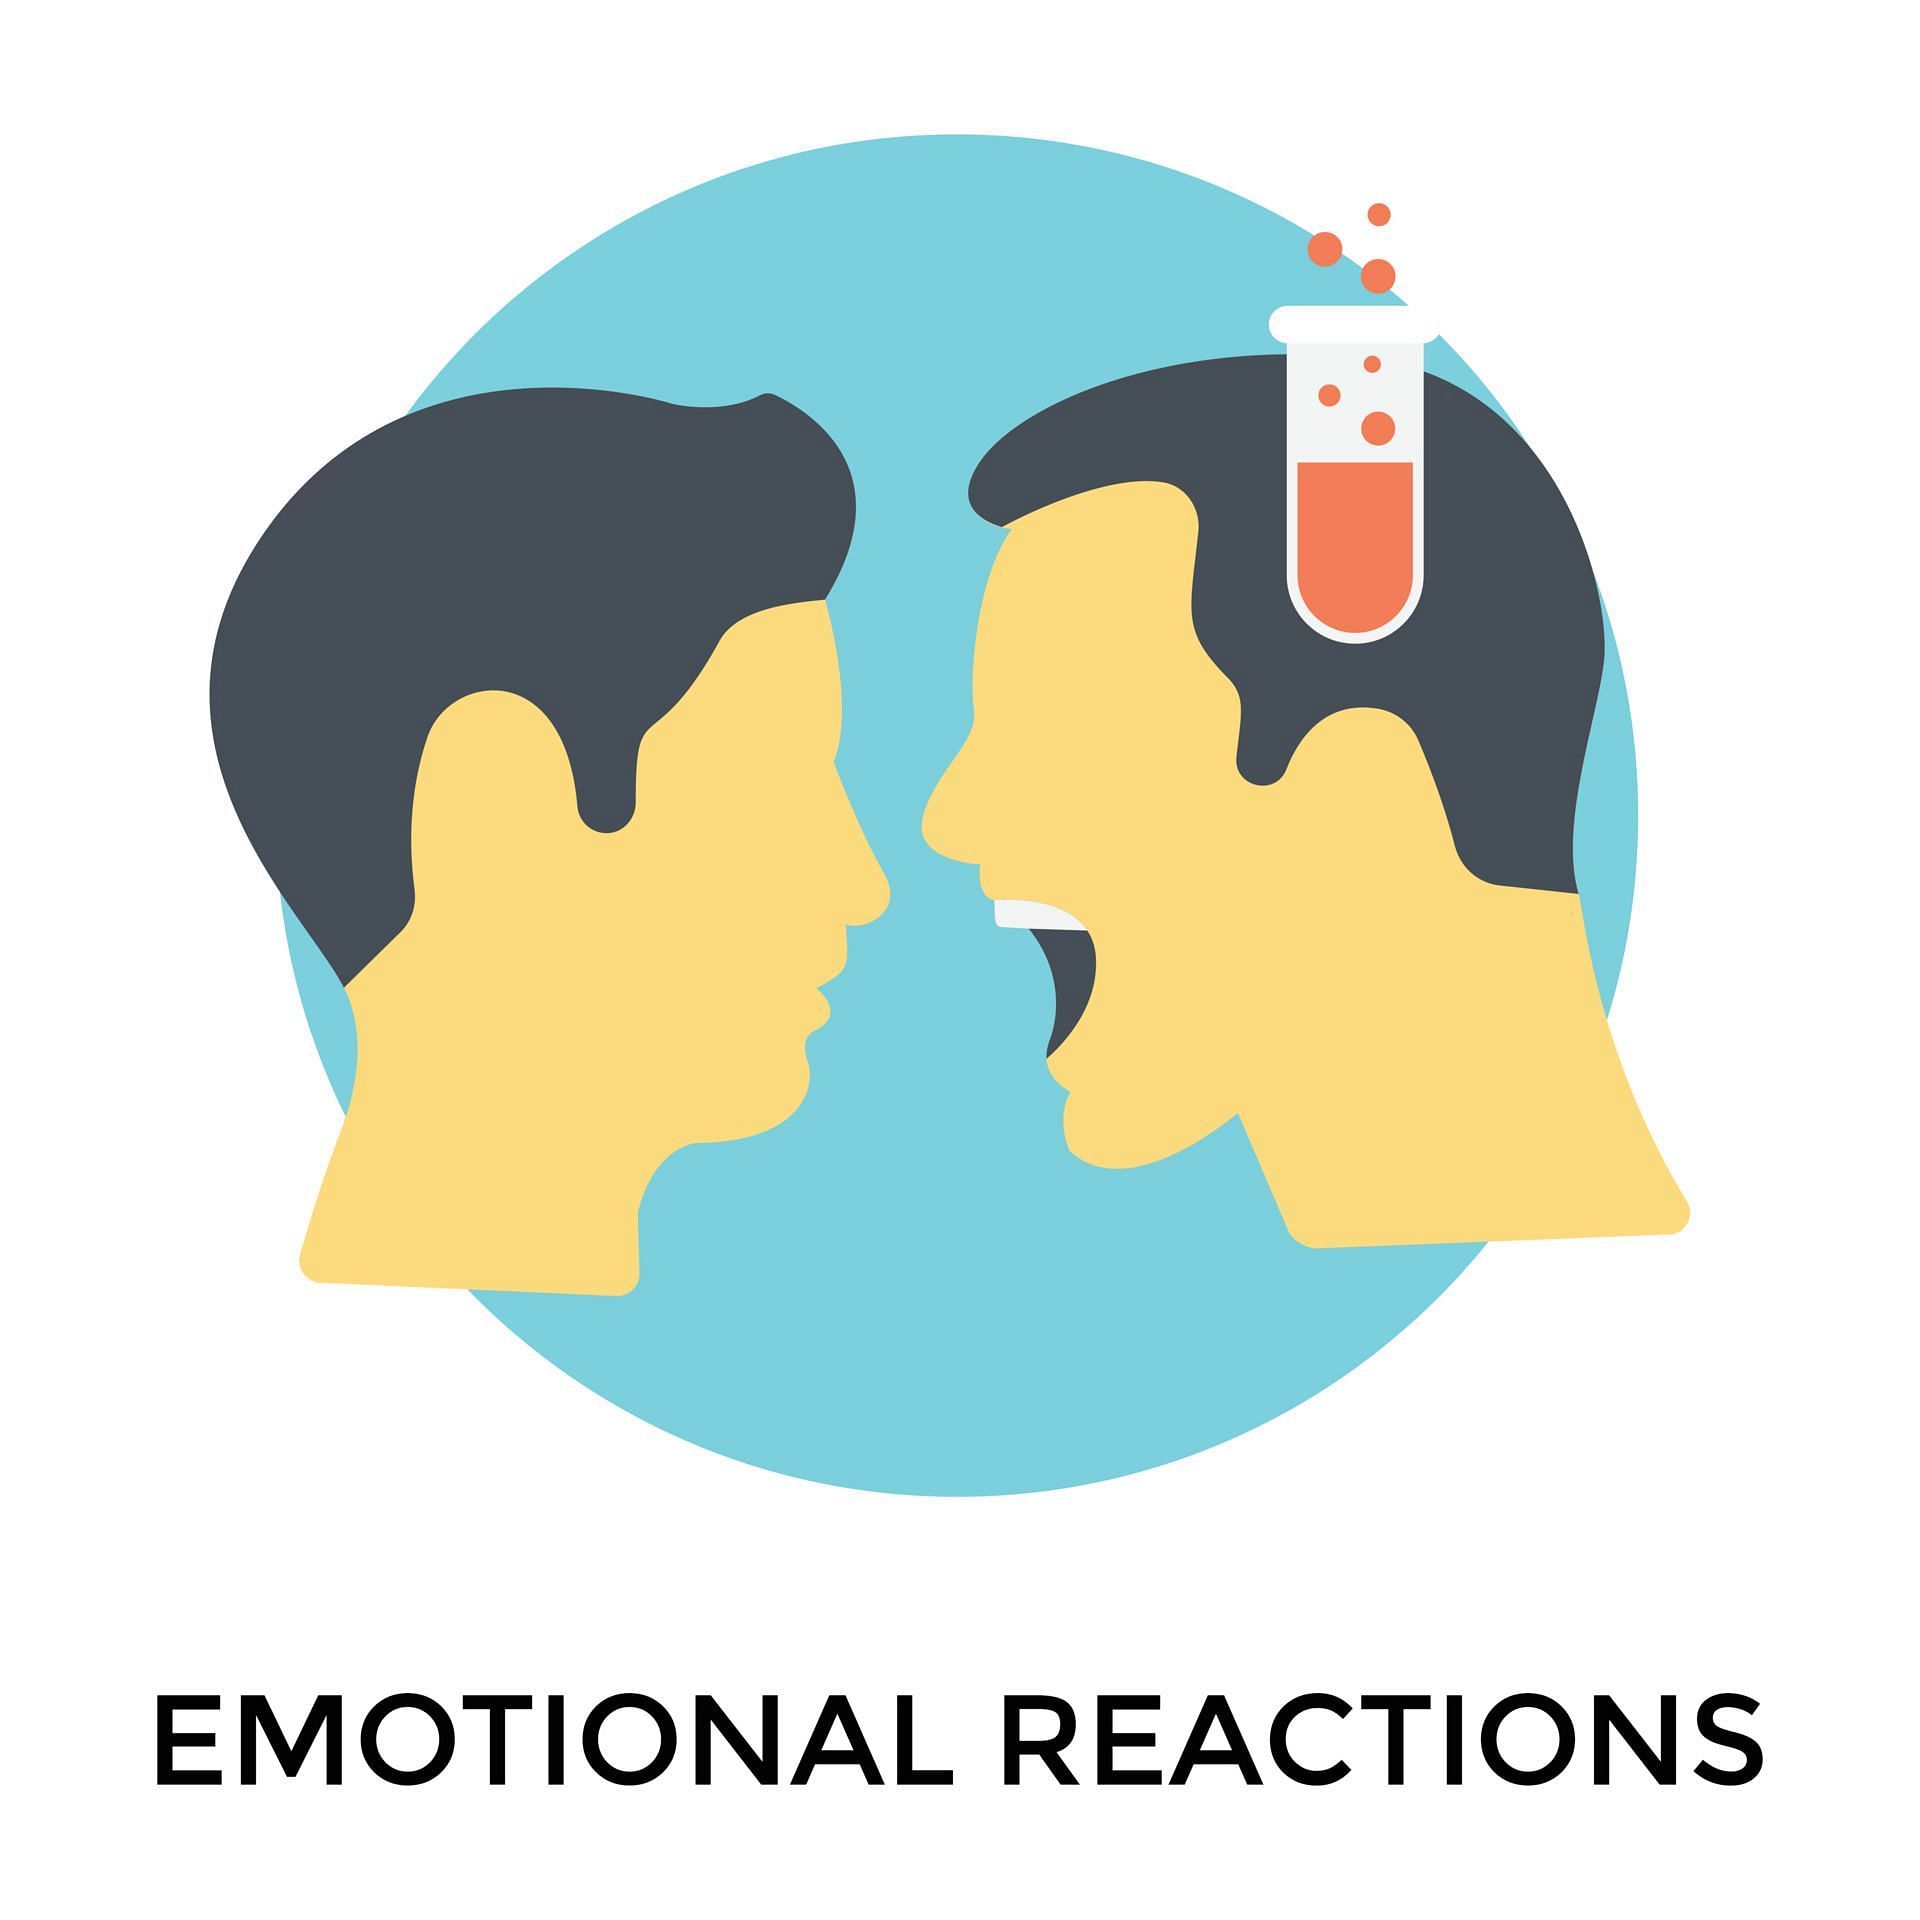 Being emotionally reactive is injurious to our mental health. (Image via Vecteezy/Kashif Aleem)